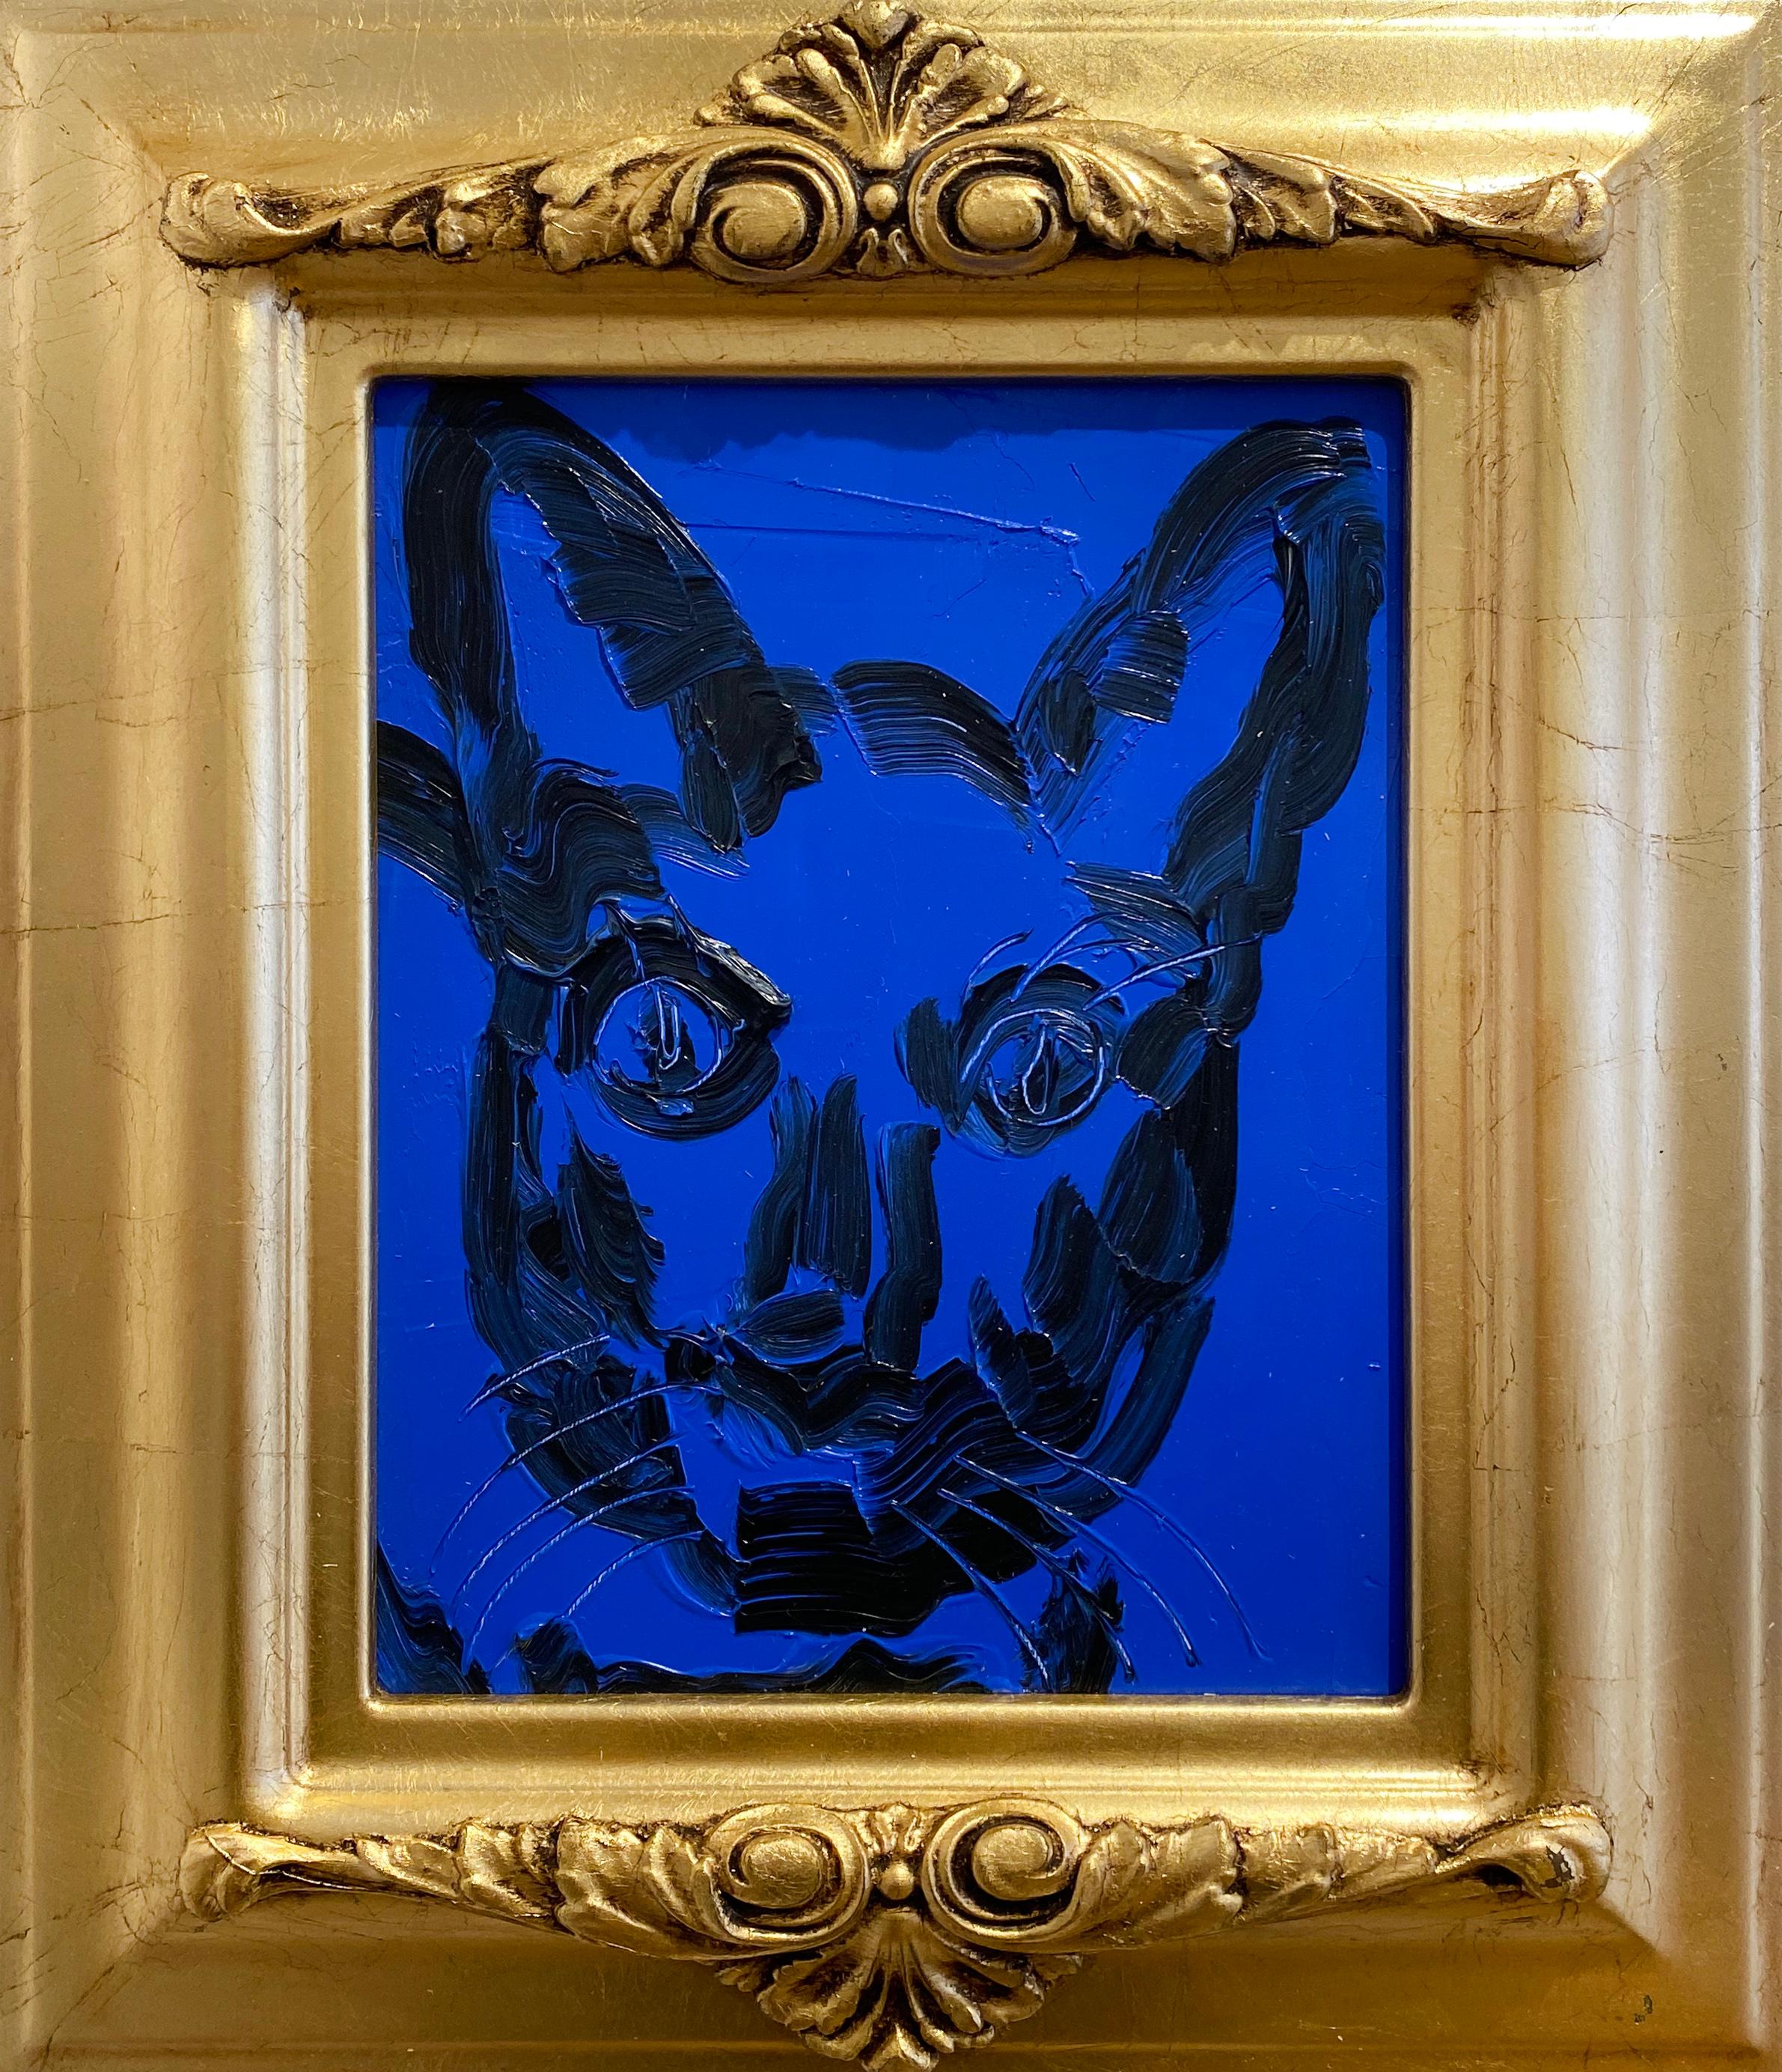 Blue Man Meows - Painting by Hunt Slonem